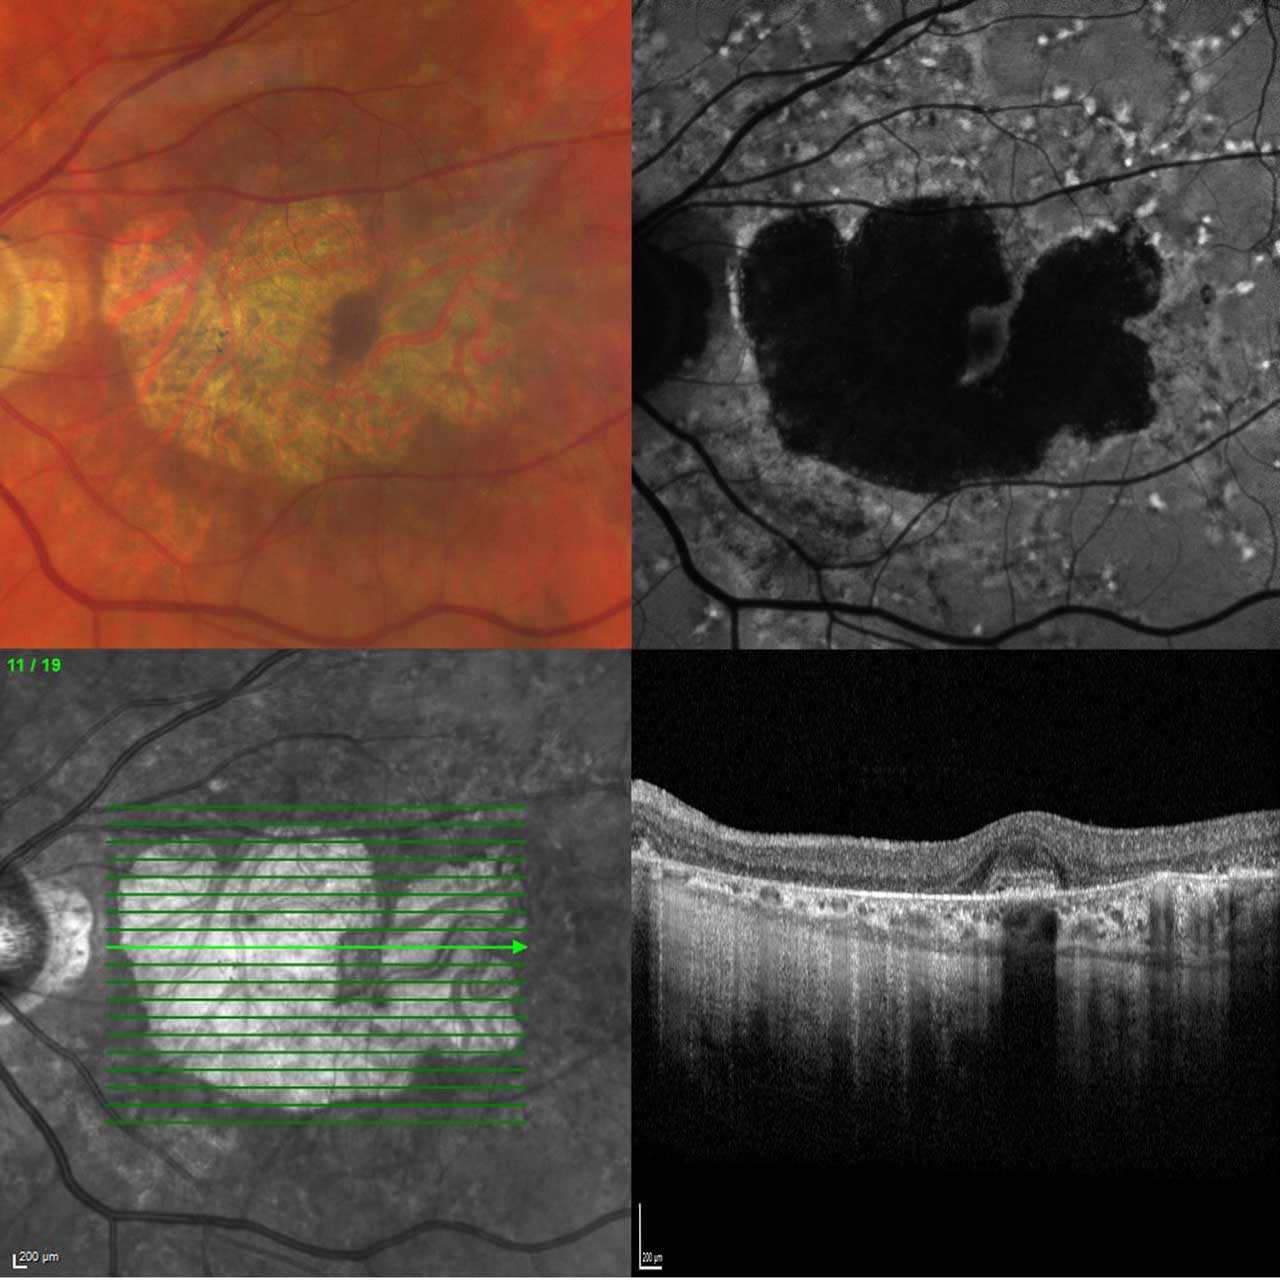 Figure 3. Atrophy secondary to Stargardt macular dystrophy (70-year-old patient with biallelic pathogenic variants in the ABCA4 gene). Color fundus photography, fundus autofluorescence, and optical coherence tomography with scan location indicated on near-infrared image.